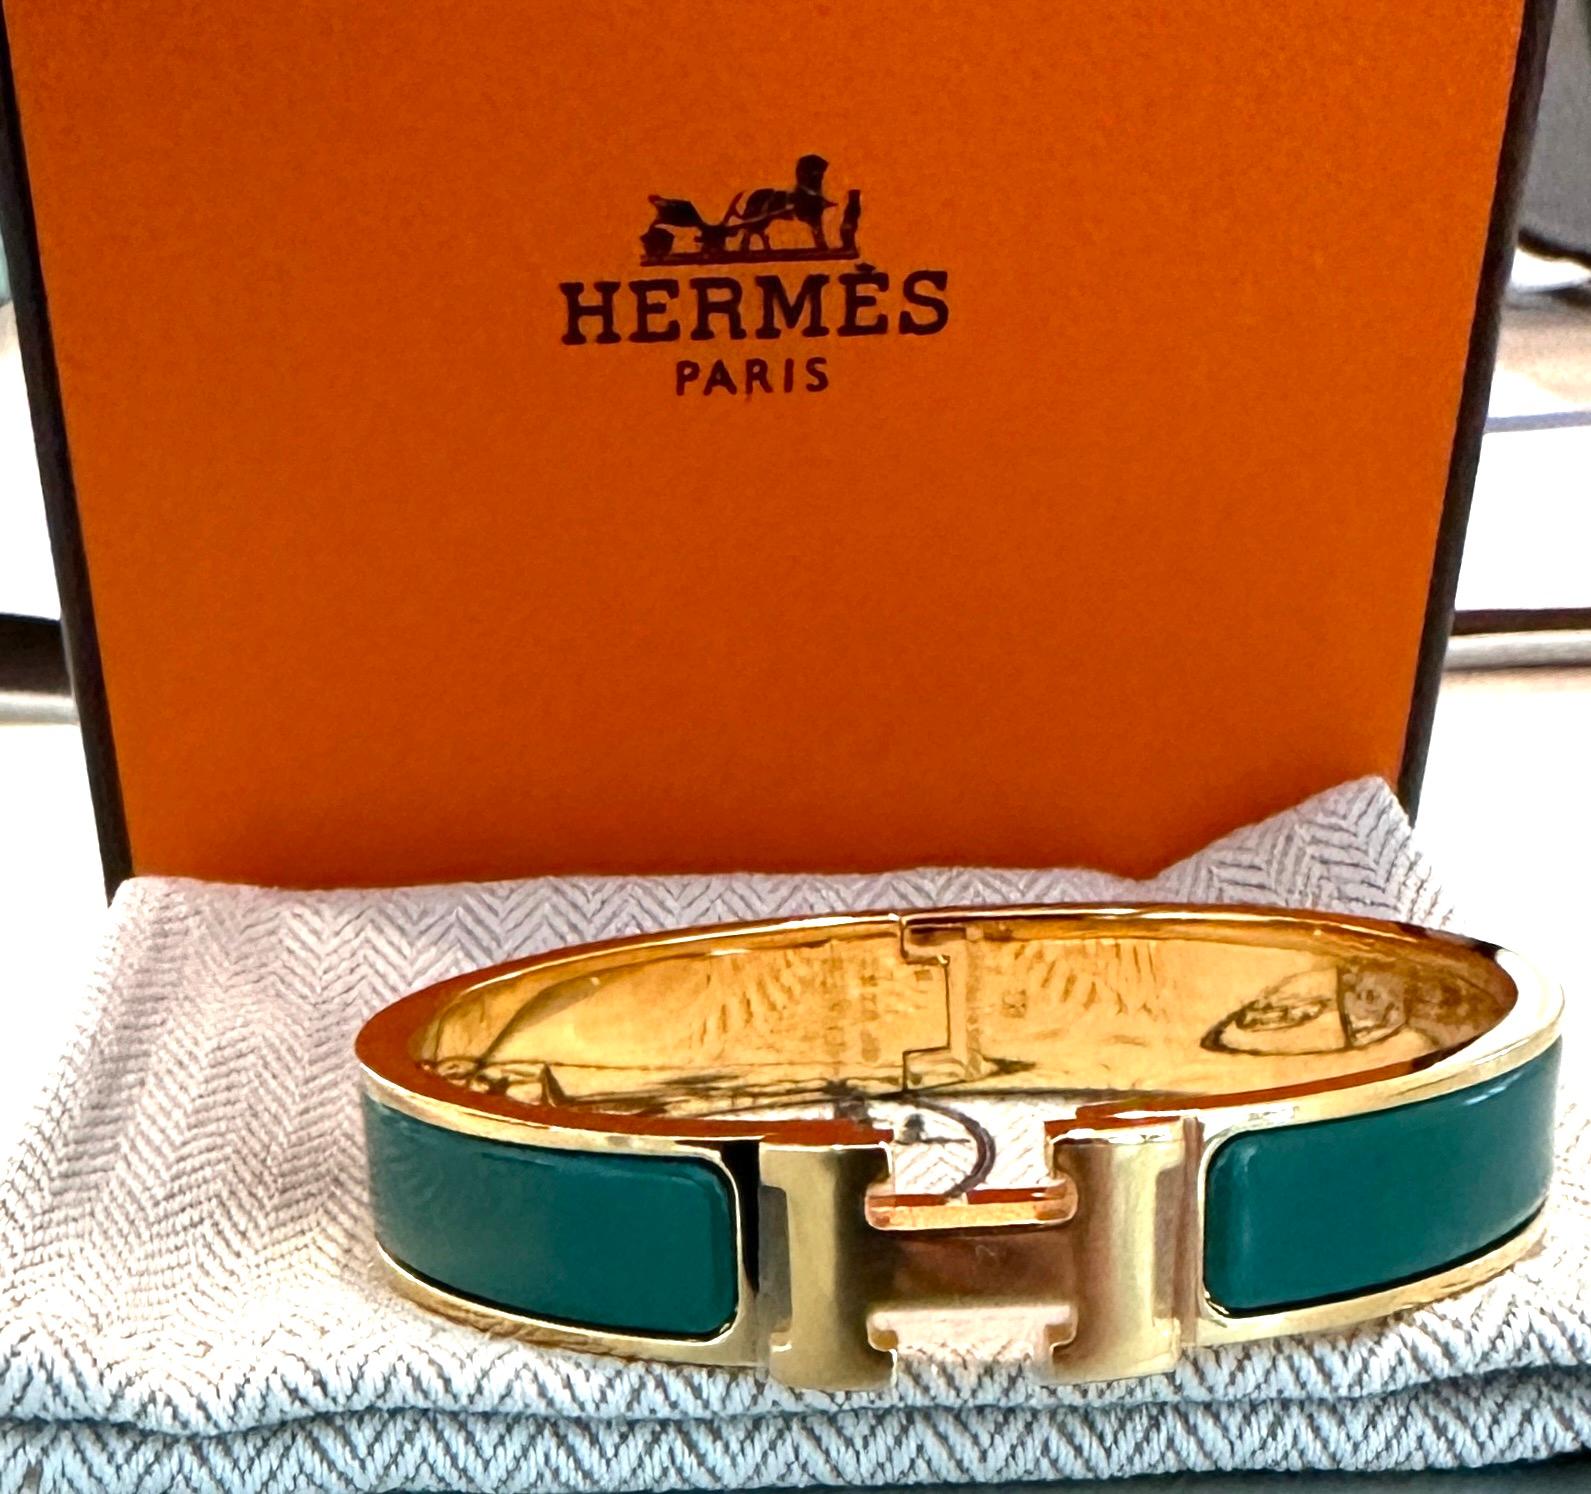 The Clic Clac H GM
GM SIZE 
Hermes bracelet in Yellow Gold Plated 
Color is Vert Flamboyant
Pink
GM size, for the larger hand 
Circumference: 7.5